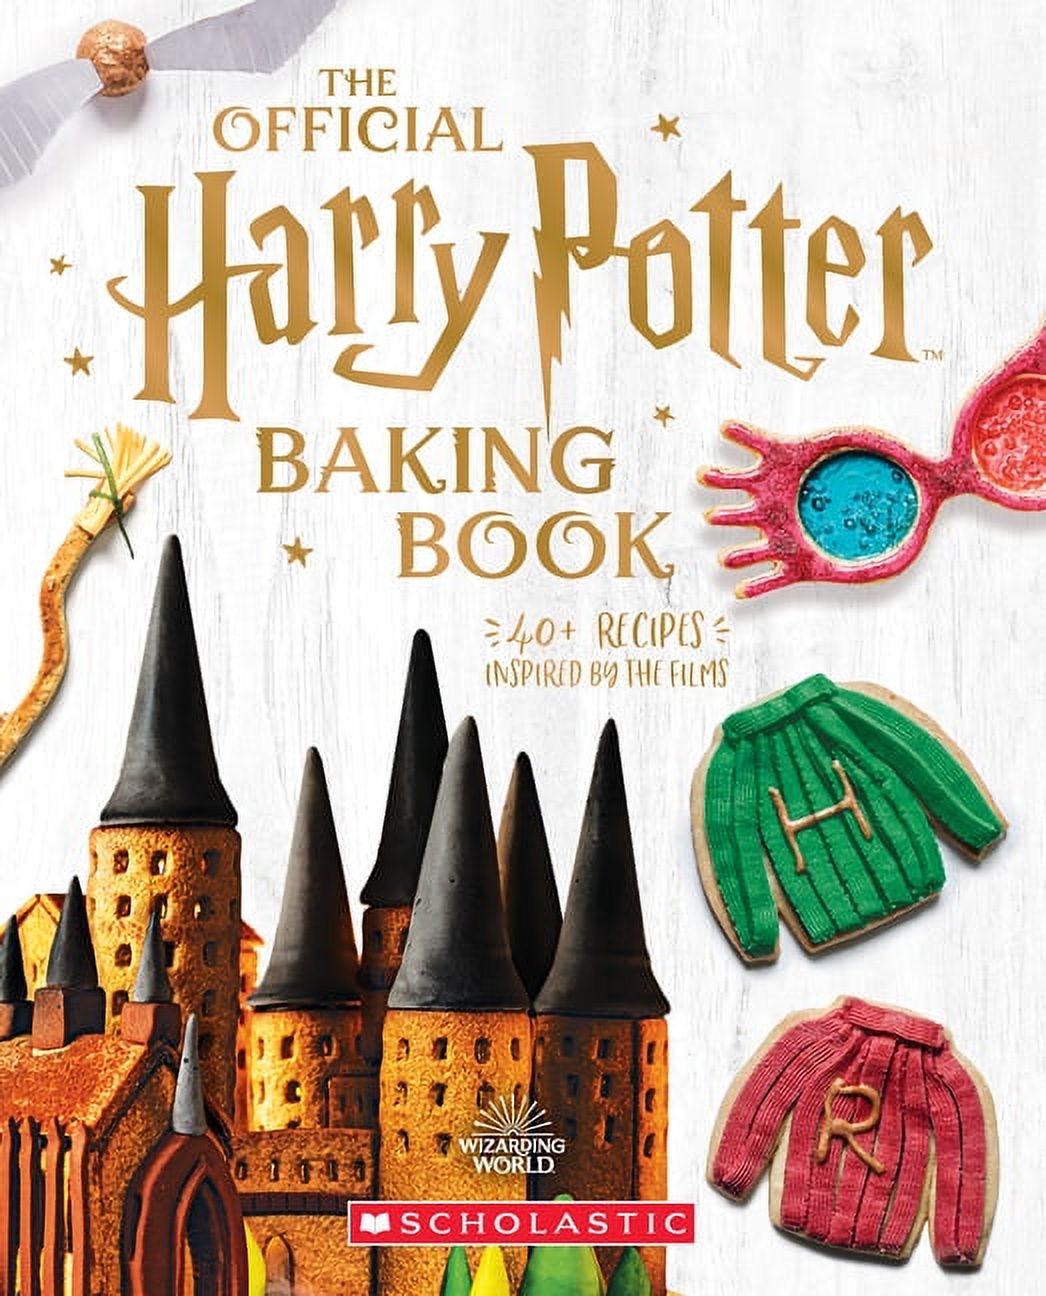 The Official Harry Potter Baking Book: 40+ Recipes Inspired by the Films -- Joanna Farrow - image 1 of 1